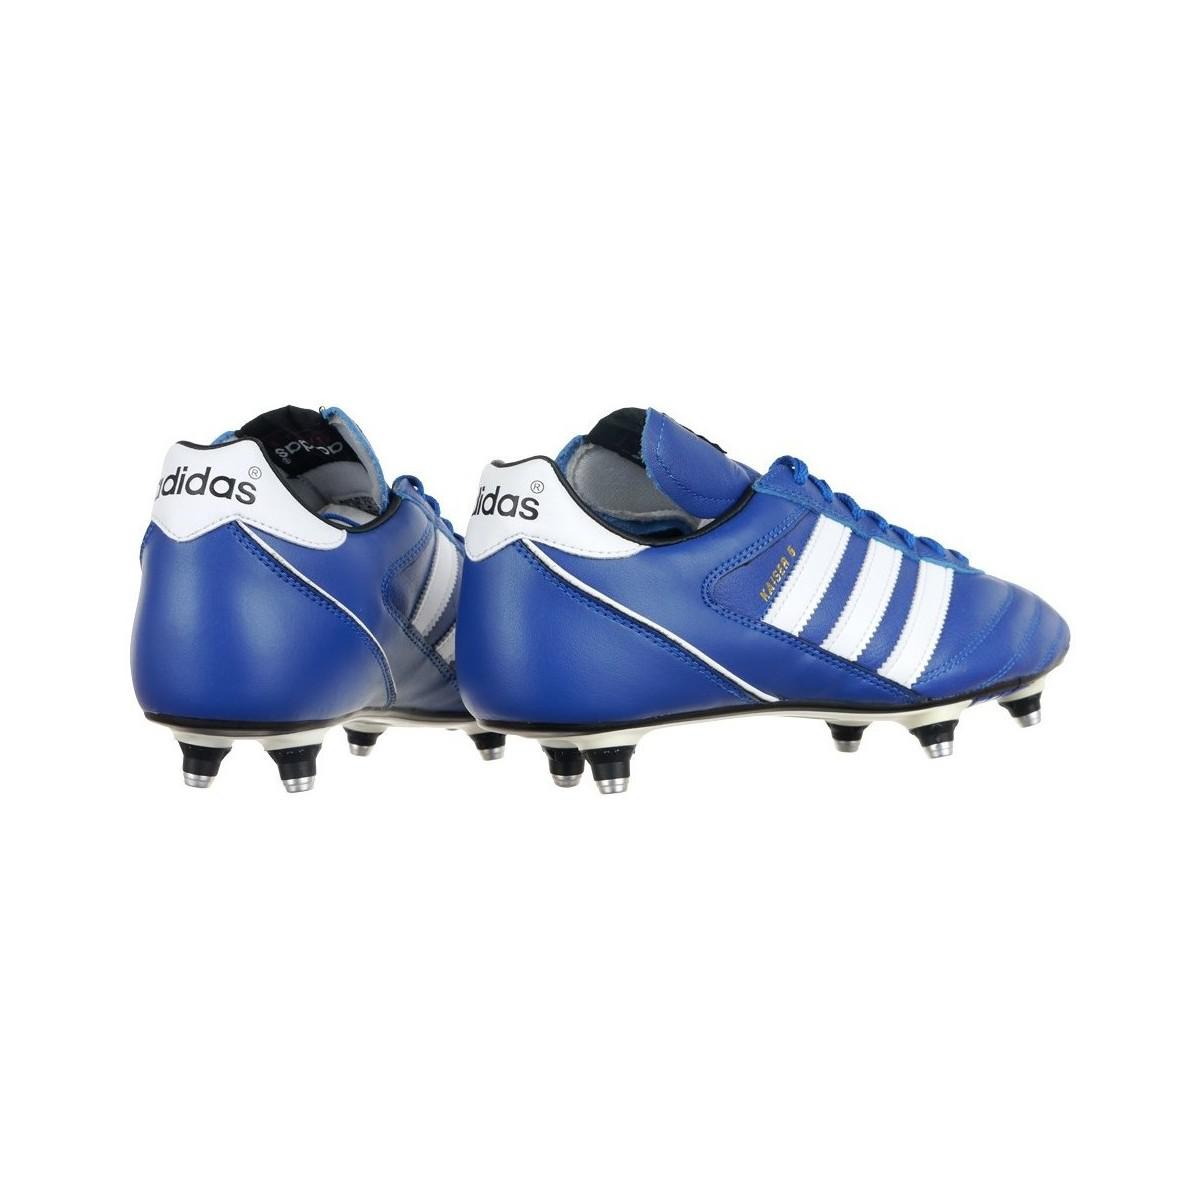 Adidas Kaiser 5 Cup Men S Football Boots In Blue For Men Lyst